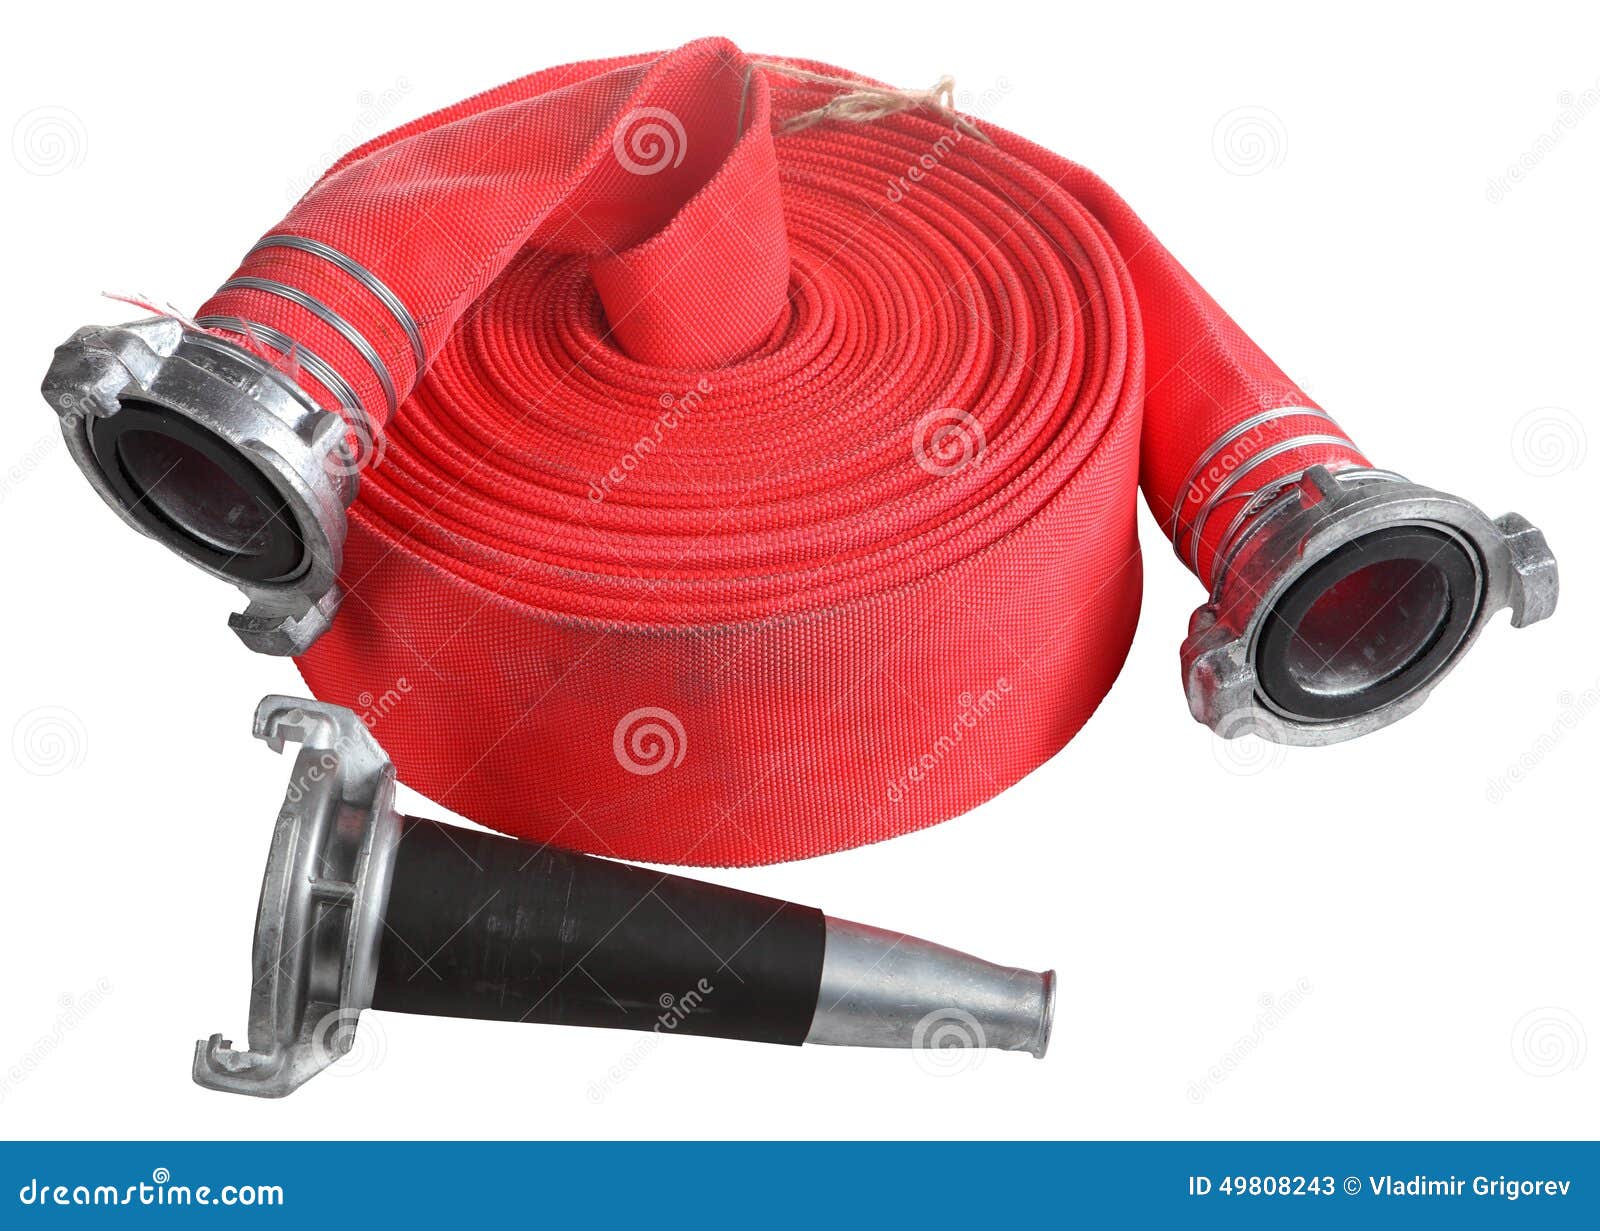 https://thumbs.dreamstime.com/z/red-fire-hose-winder-roll-roller-coupler-nozzle-fighter-industry-reels-fighting-used-high-pressure-water-spraying-49808243.jpg